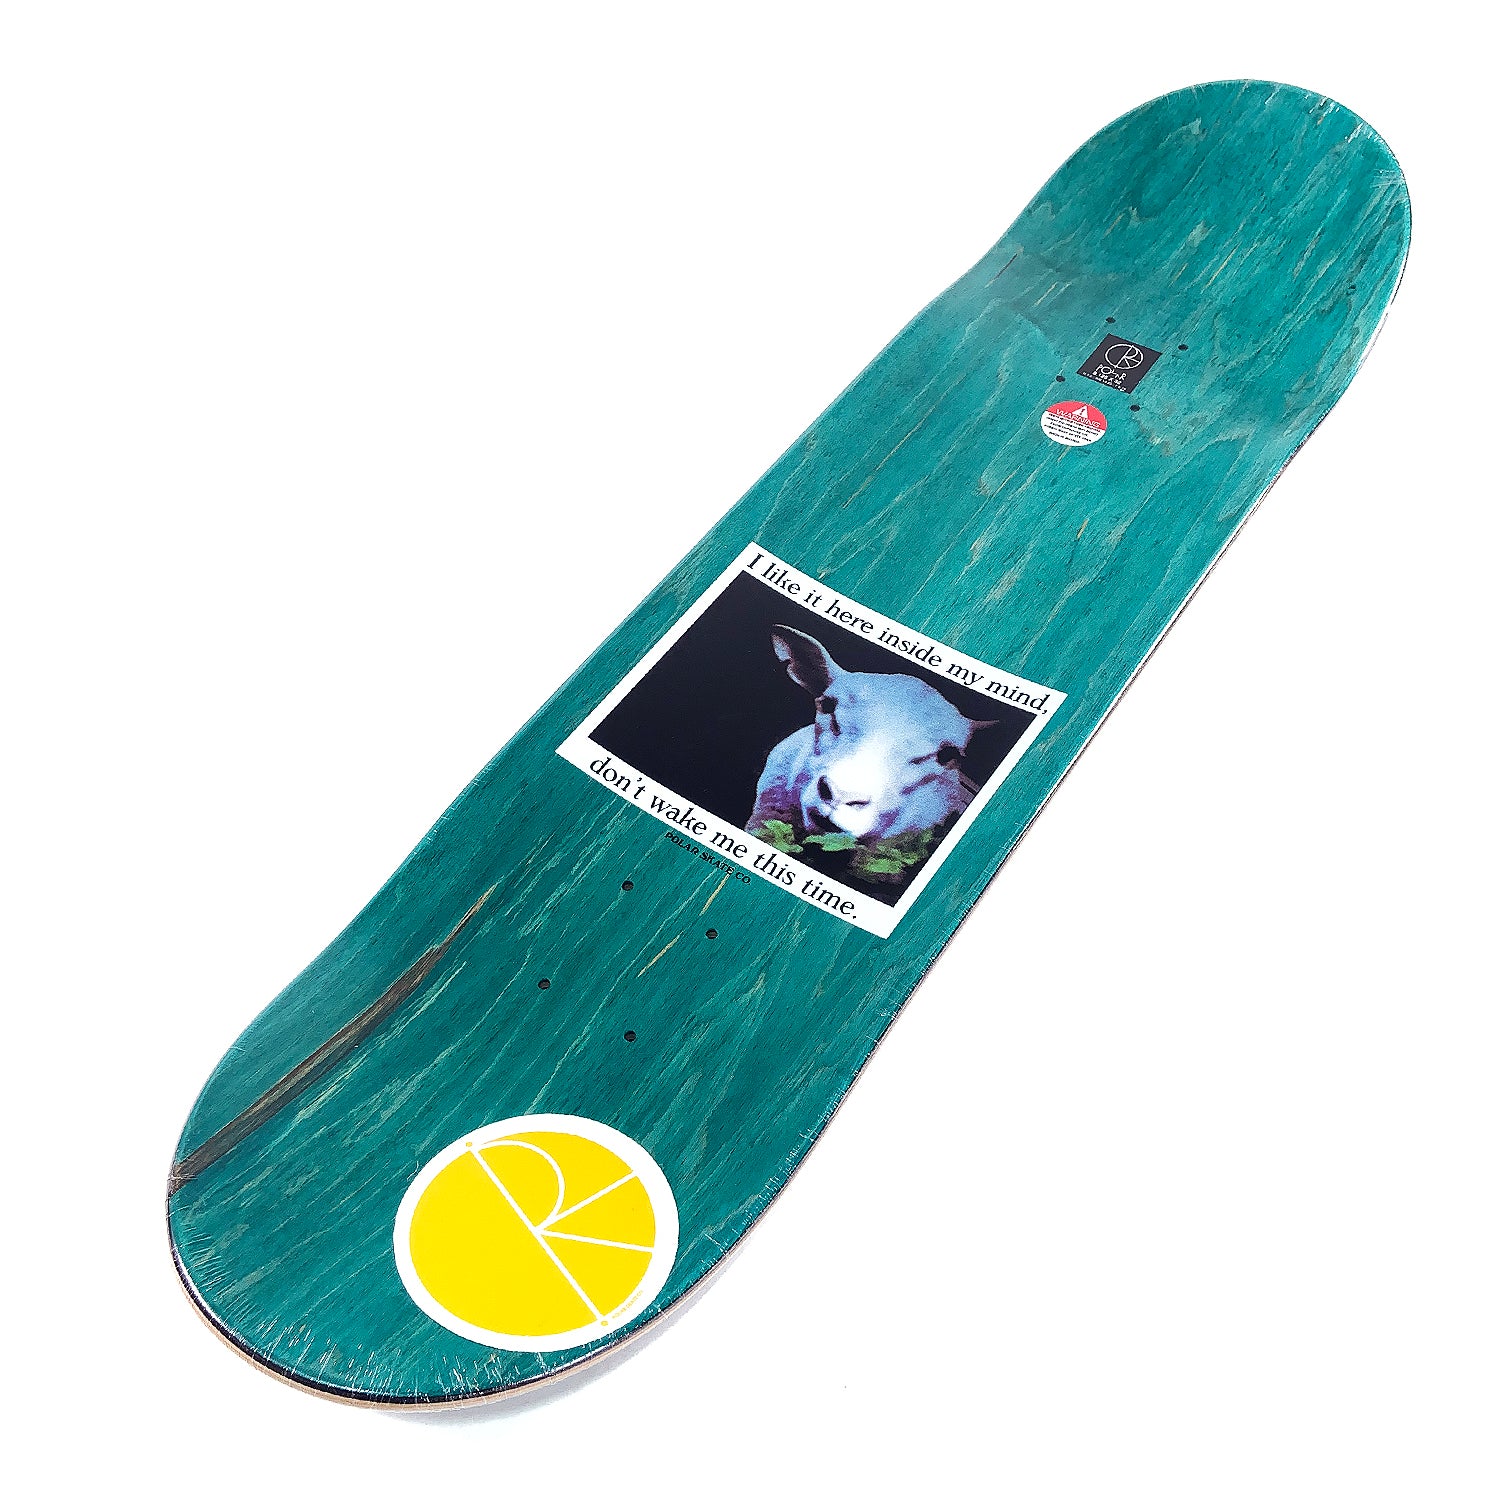 Polar - 8.125" - Team I Like It Here...Sheep In Motion Deck - Prime Delux Store